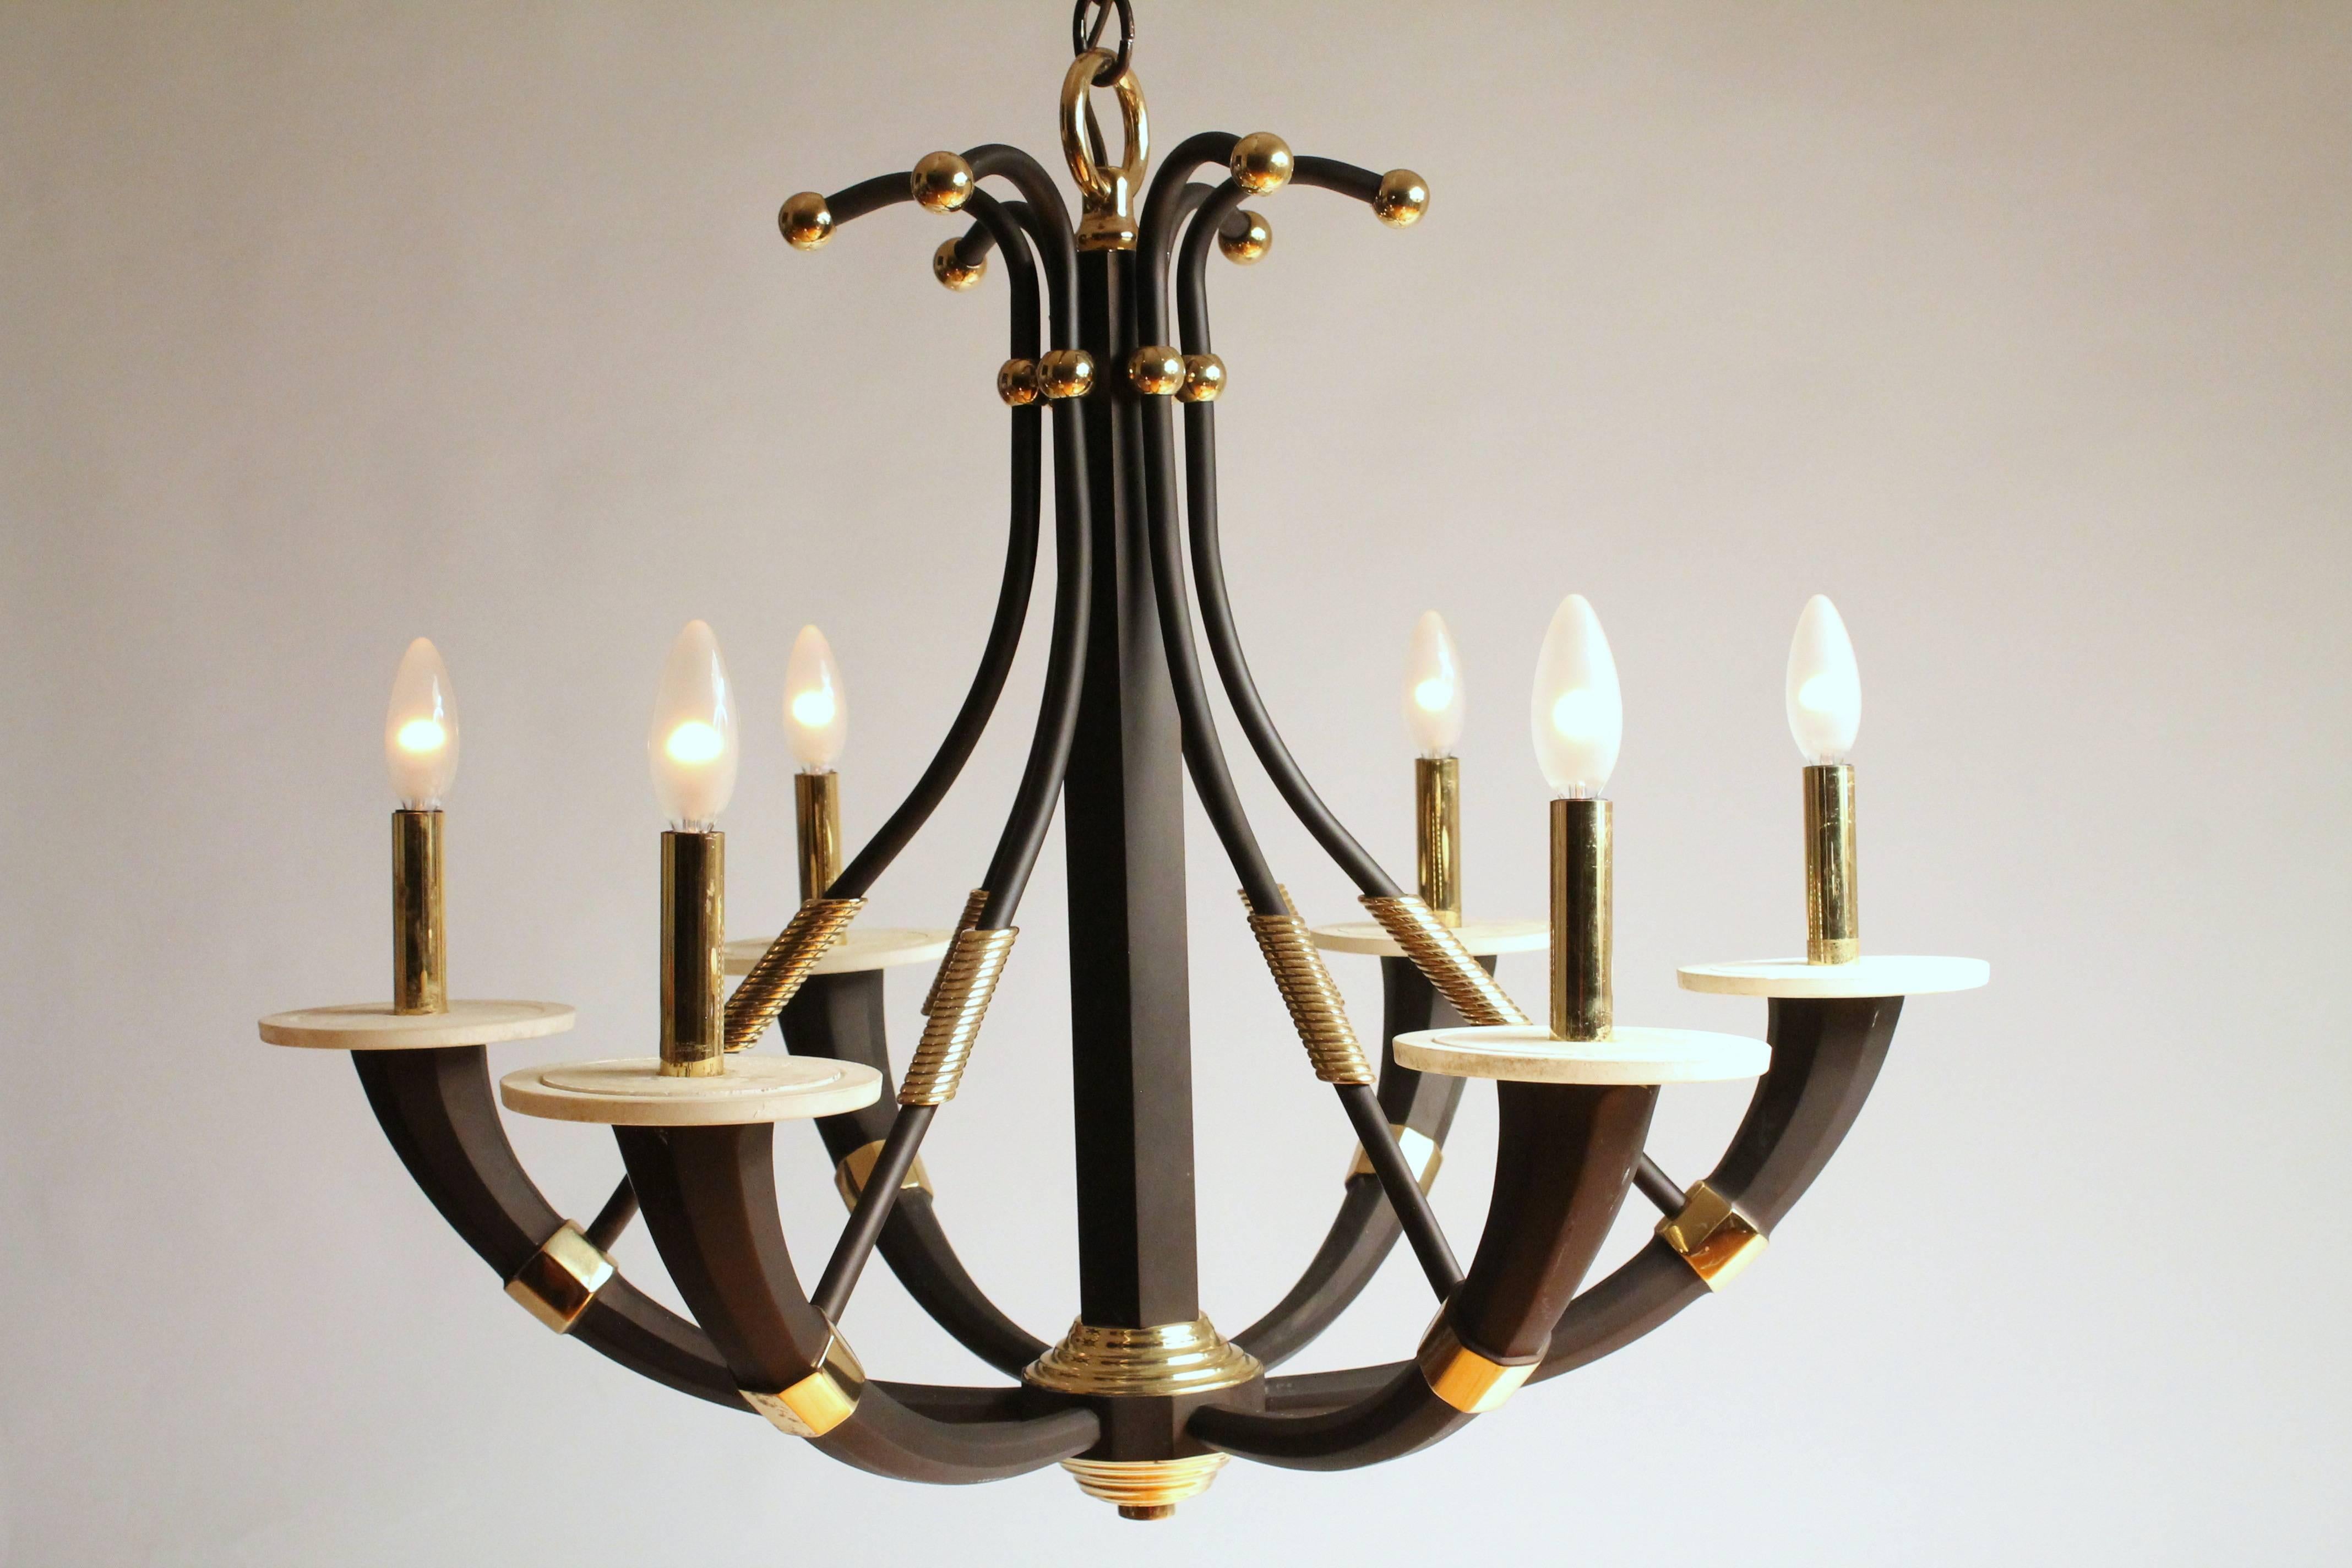 All brass modern chandelier with a dark brown anodized matte finish.

25 pounds of pure thick casted brass.

Well made, solid construction with prime quality material. 

The white supportive disc are made of deep etched glass to make them looks like